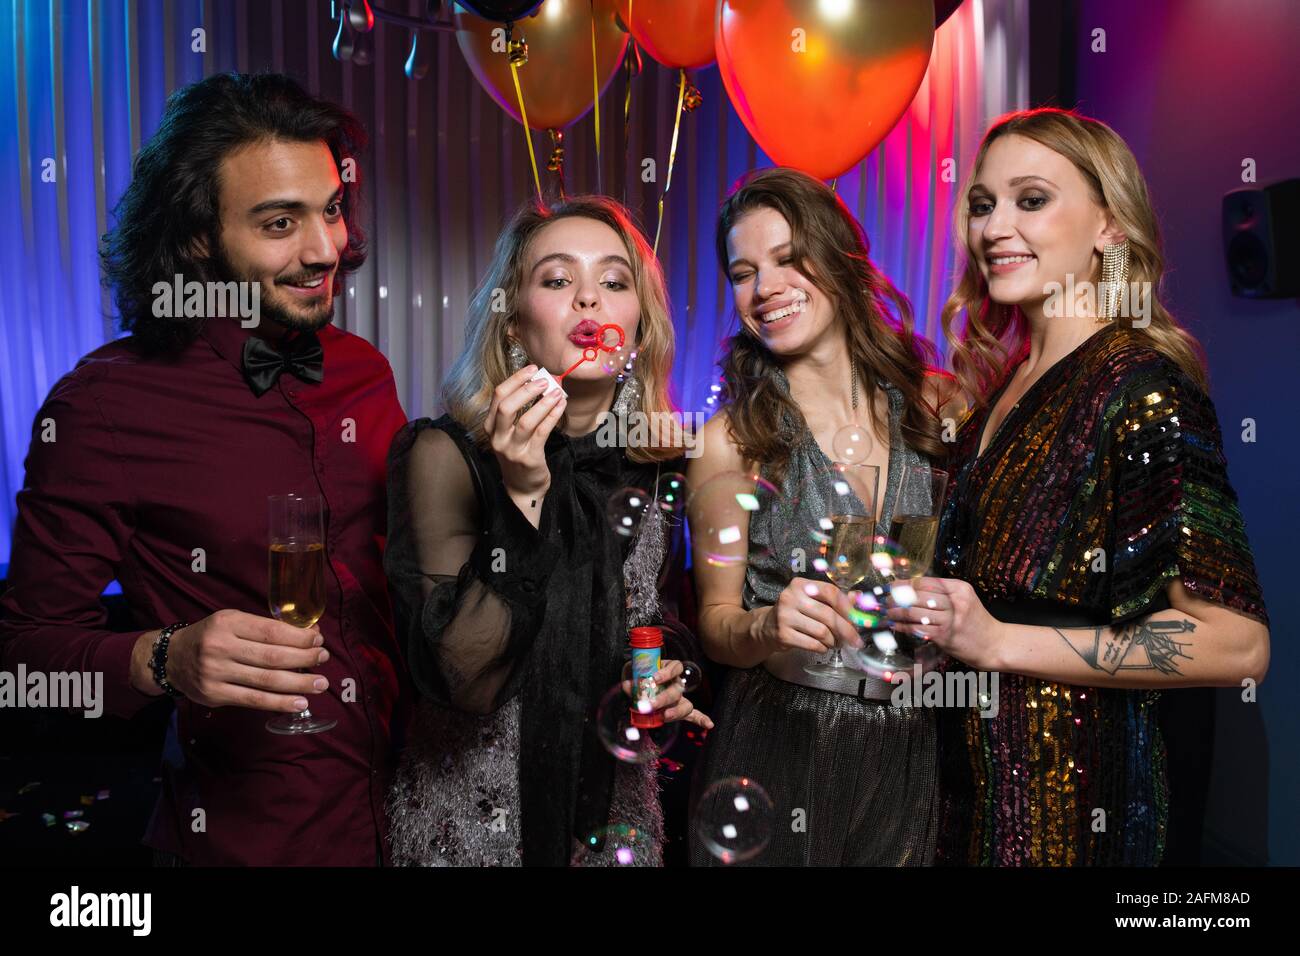 One of pretty girls blowing soap bubbles among her friends at birthday party Stock Photo